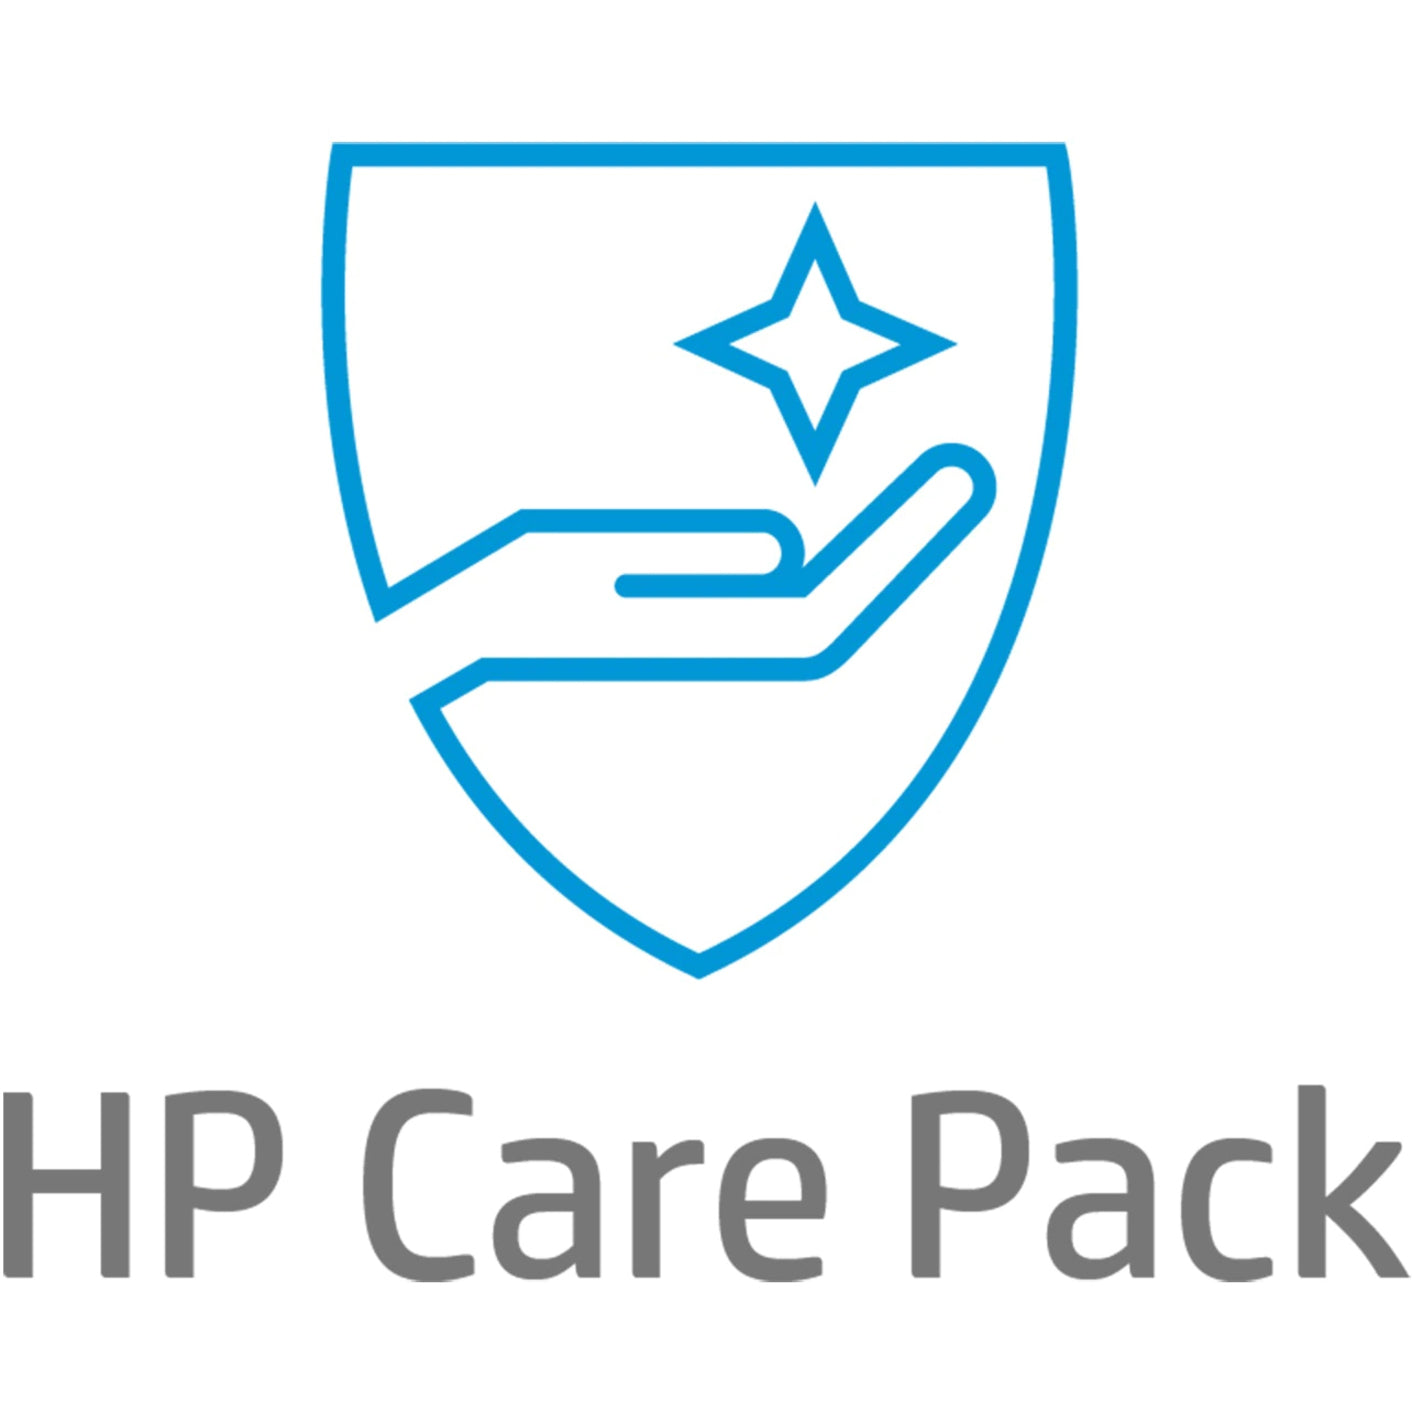 HP Care Pack Accidental Damage Protection Plus Pickup and Return - 3 Year - Service (UM949E)